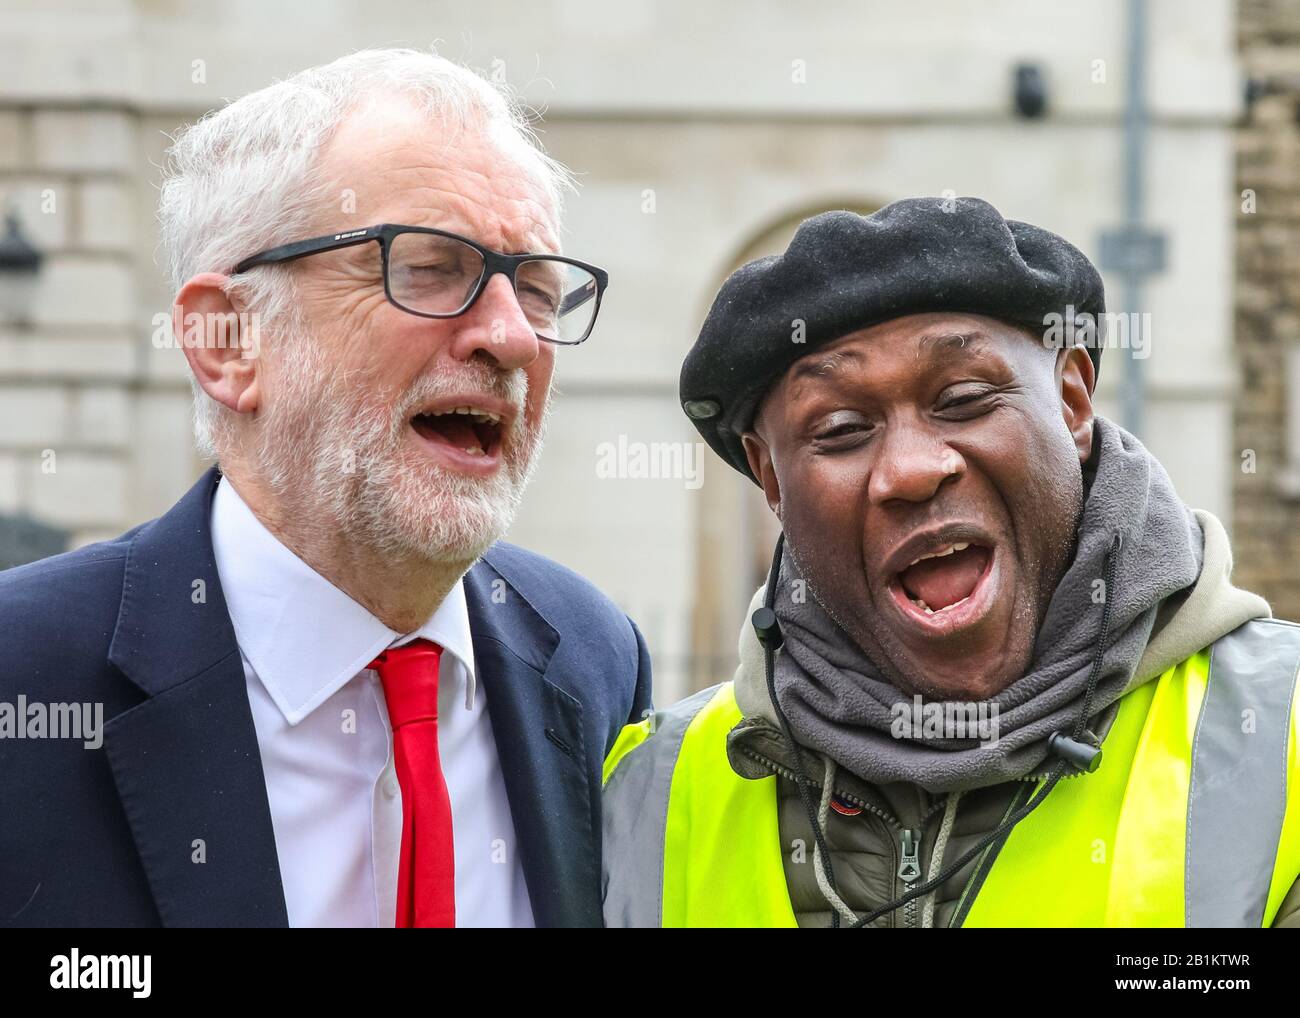 Westminster, London, UK. 26th Feb, 2020. Jeremy Corbyn shares a joke with Gary Sinclair, MBE, a pcs rep. Labour Leader Jeremy Corbyn, as well as John Mc Donnell, Dawn Butler, and Labour Chairman Ian Lavery and others speak at a protest organised by the PCS (Public and Commercial Services Union) supporting striking Interserve Workers. Outsourced facilities management workers at the Foreign and Commonwealth Office (FCO) in London began their strike period in November, because Interserve are not willing to recognise PCS. Credit: Imageplotter/Alamy Live News Stock Photo